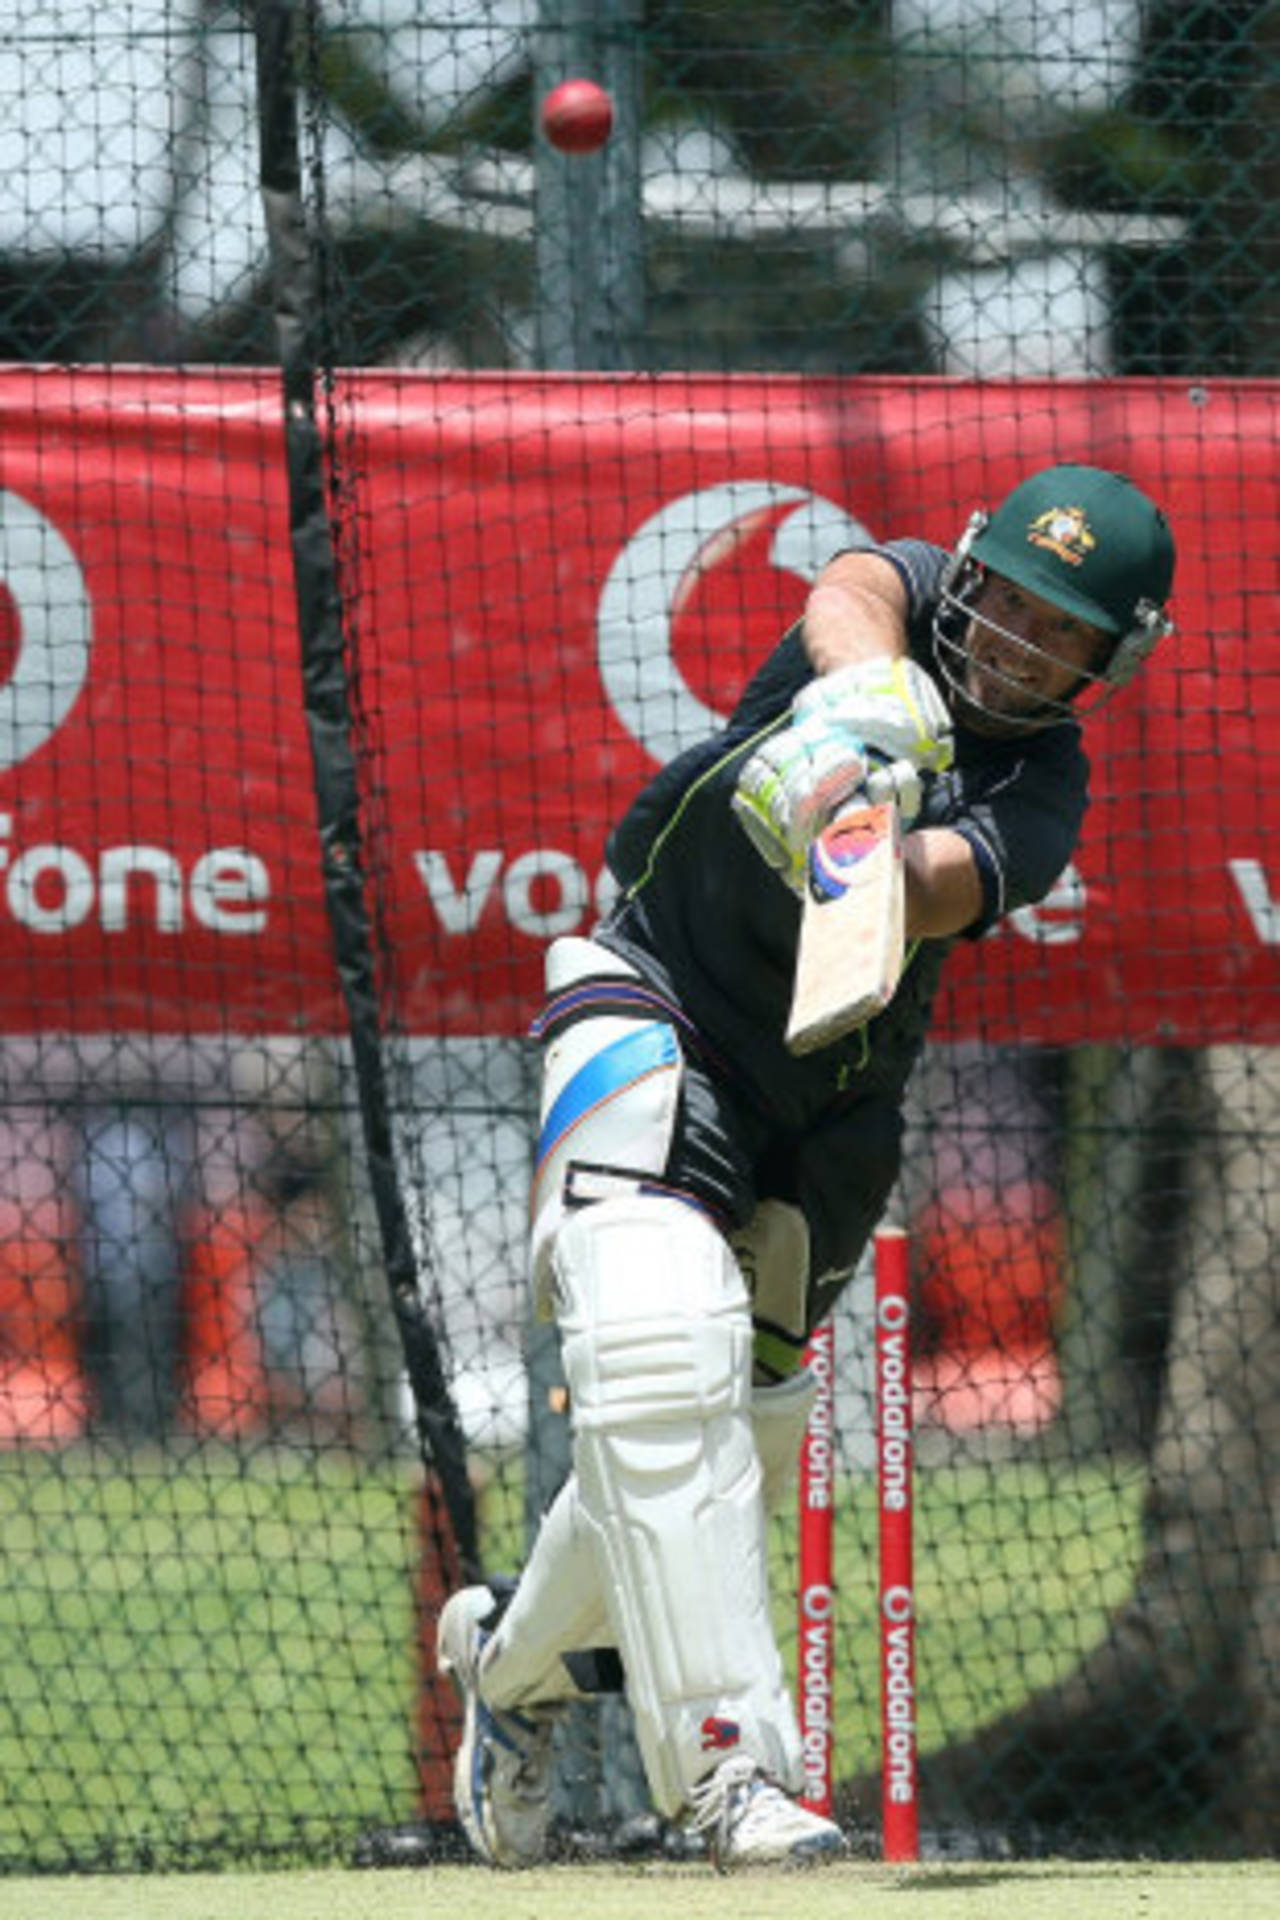 Rob Quiney bats in the nets, Brisbane, November 6, 2012